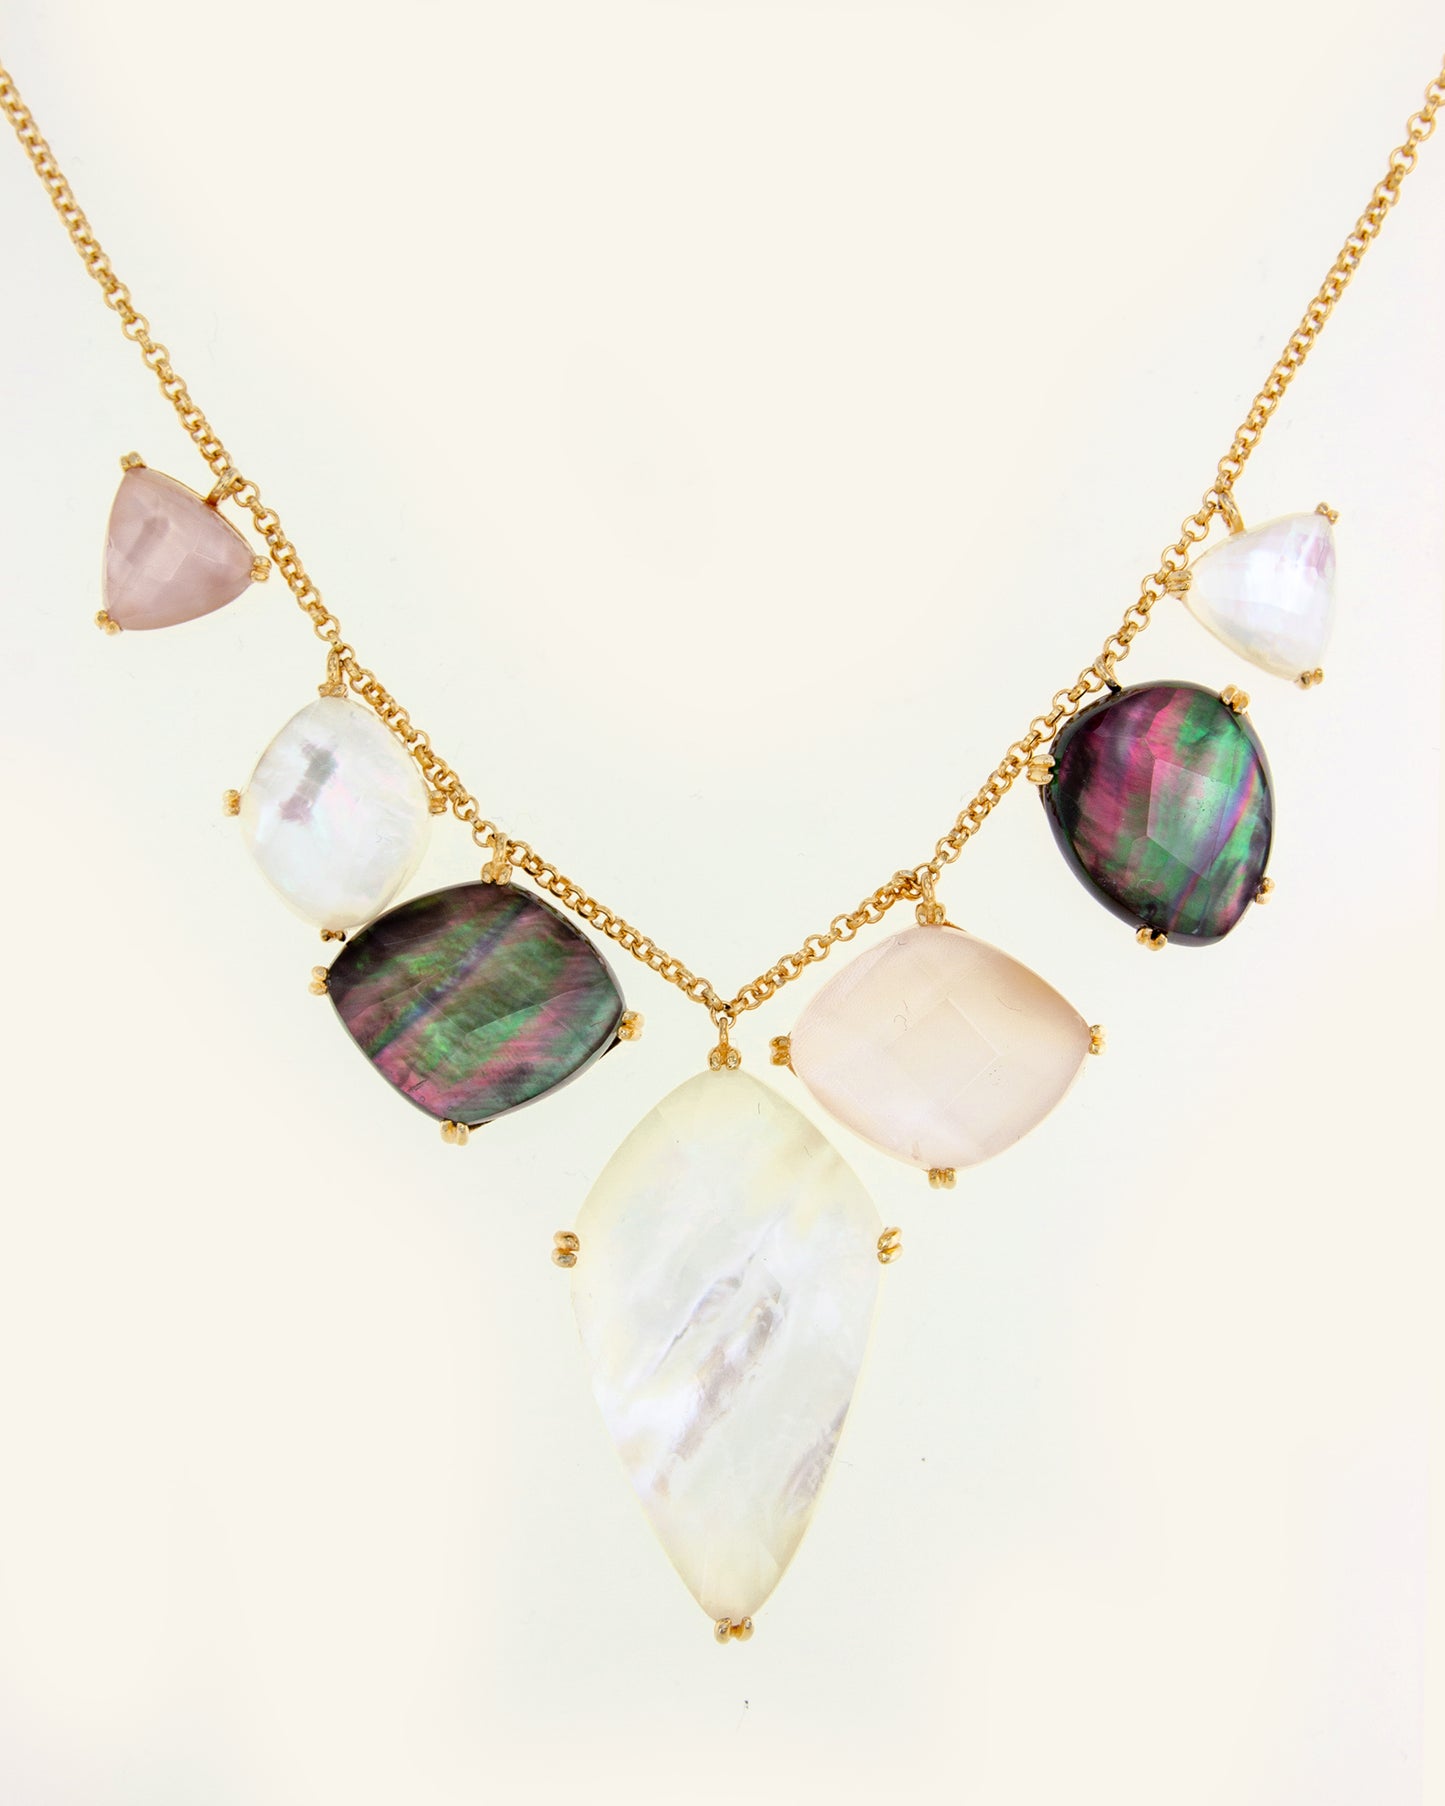 Ari necklace with tricolor mother of pearl and quartz